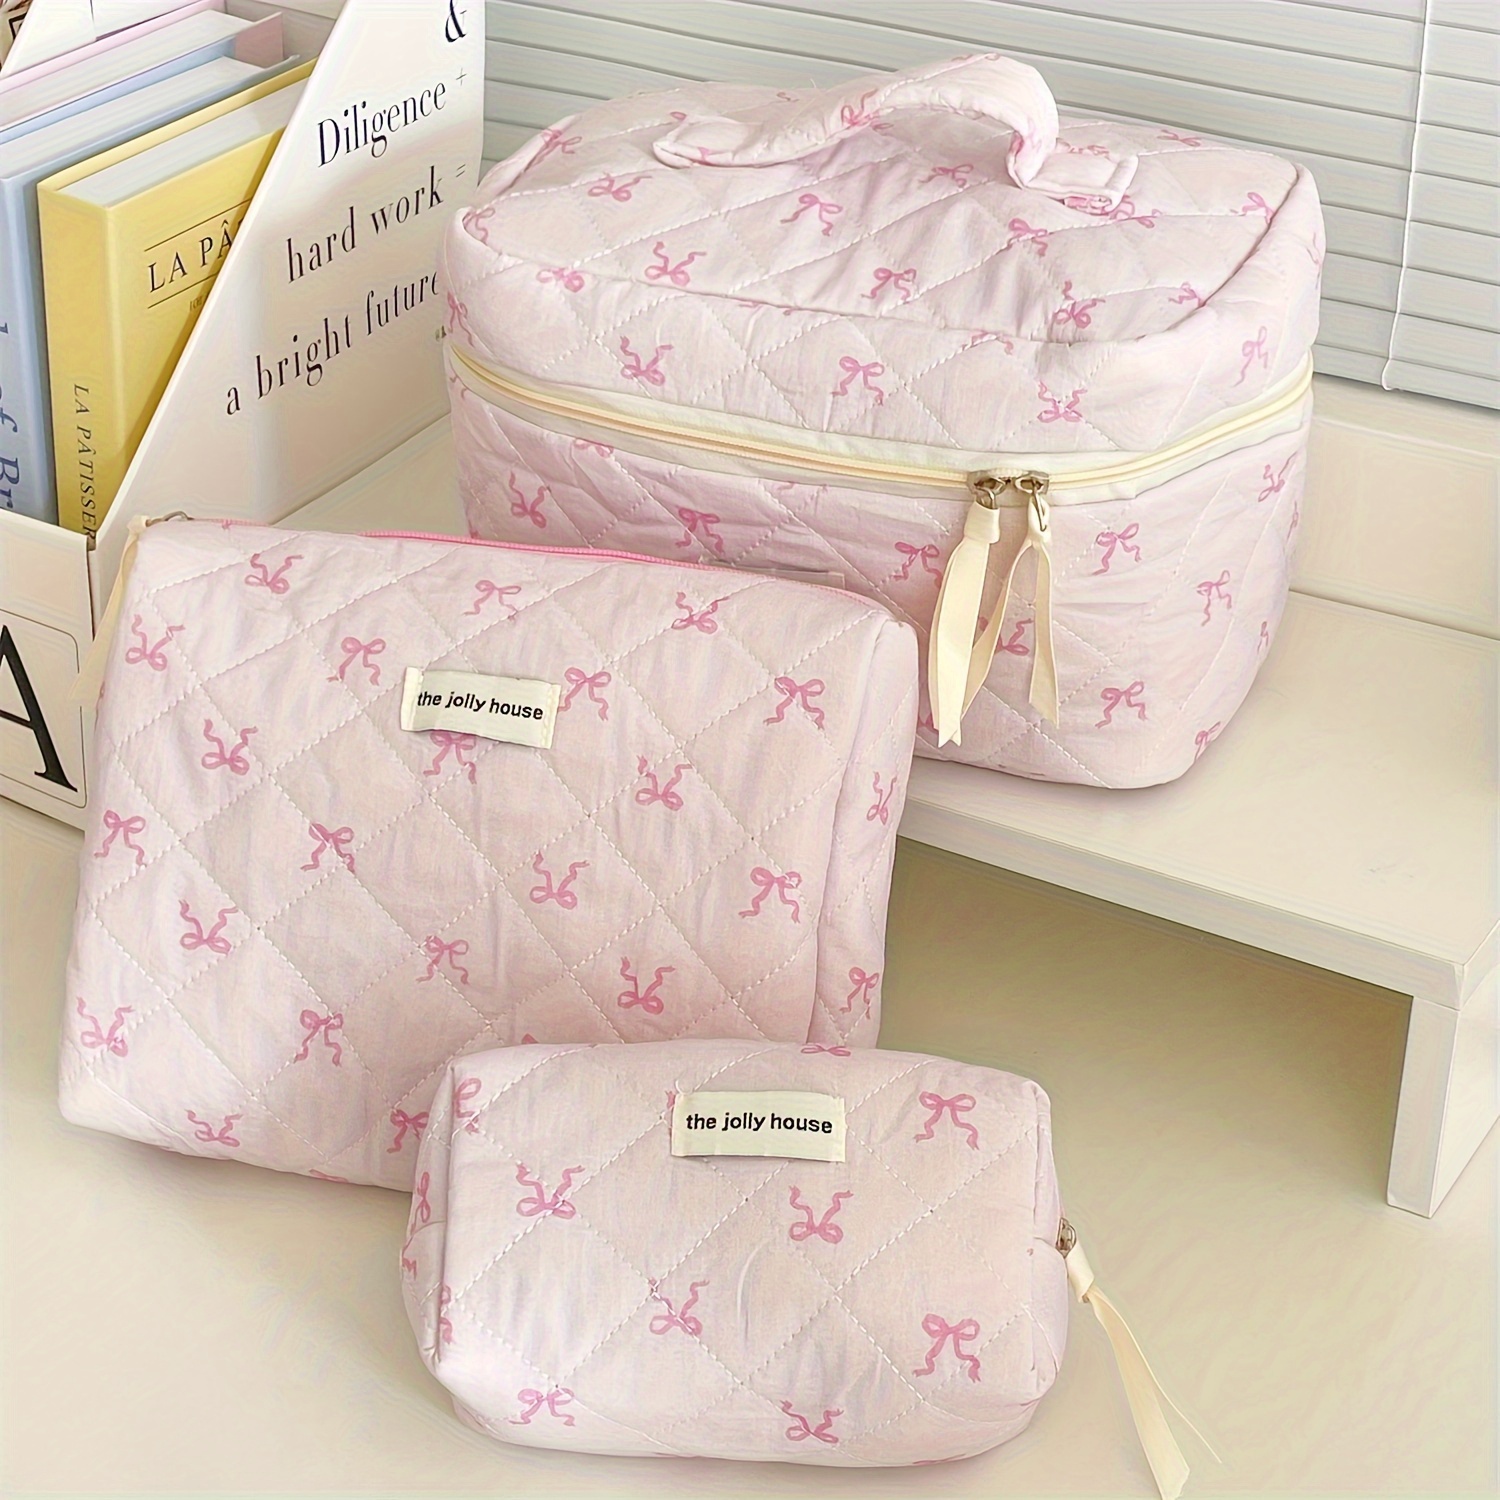 

3-piece Ribbon Bow Cosmetic Bag Set For Women - Polyester Travel Makeup Pouches With Large Capacity, Non-waterproof, Unscented - Knot Design Beauty Organizer Cases